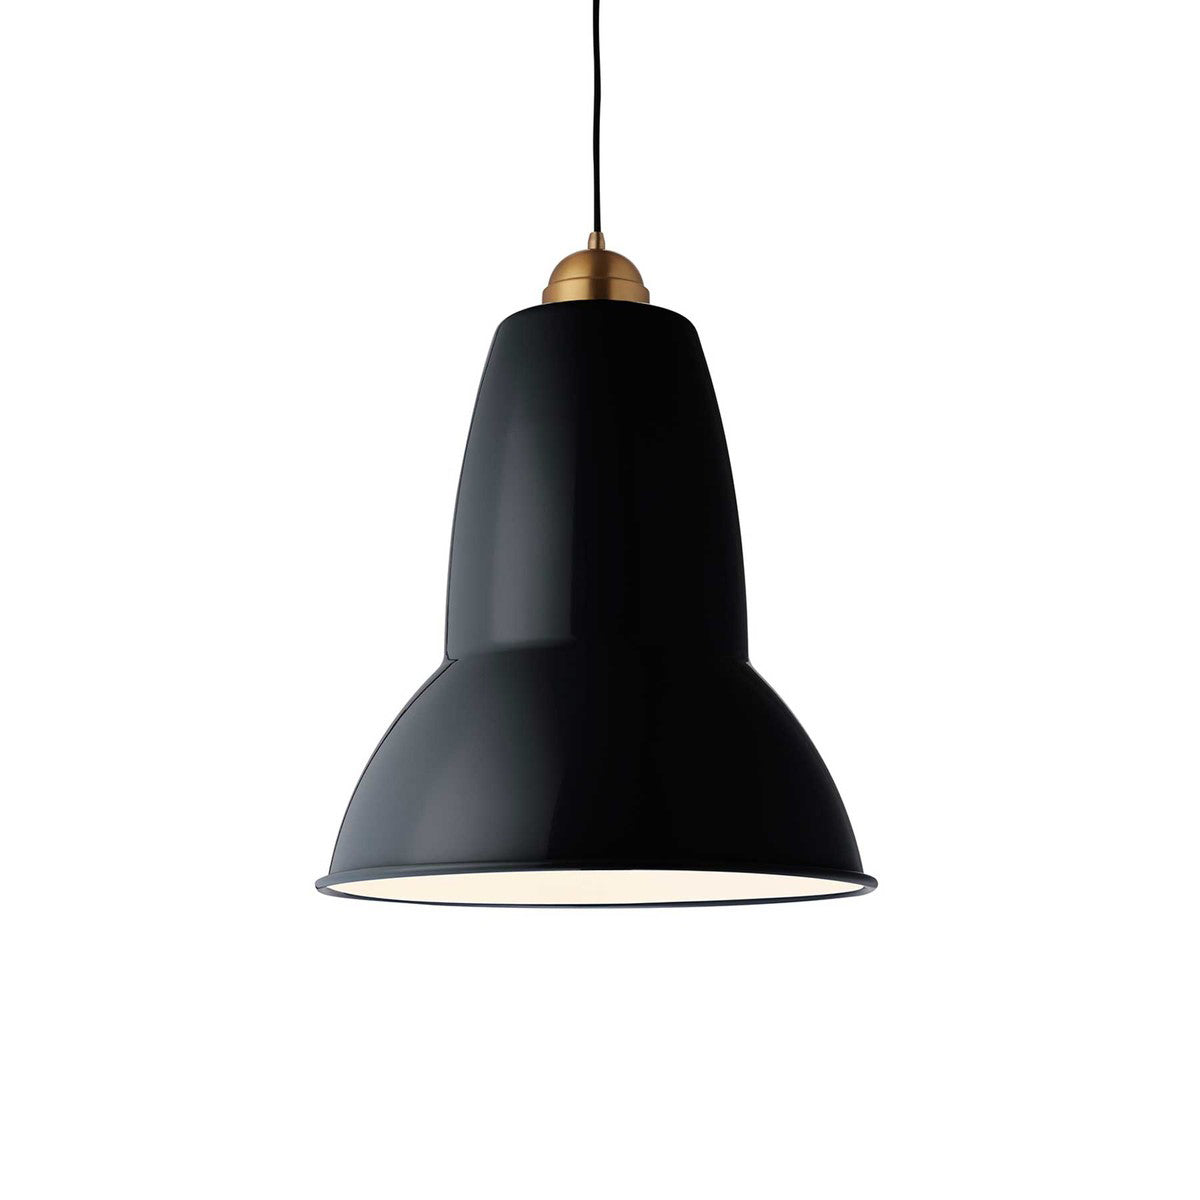 Anglepoise Giant 1227 pendant light in deep slate with brass detail from Warehouse Home